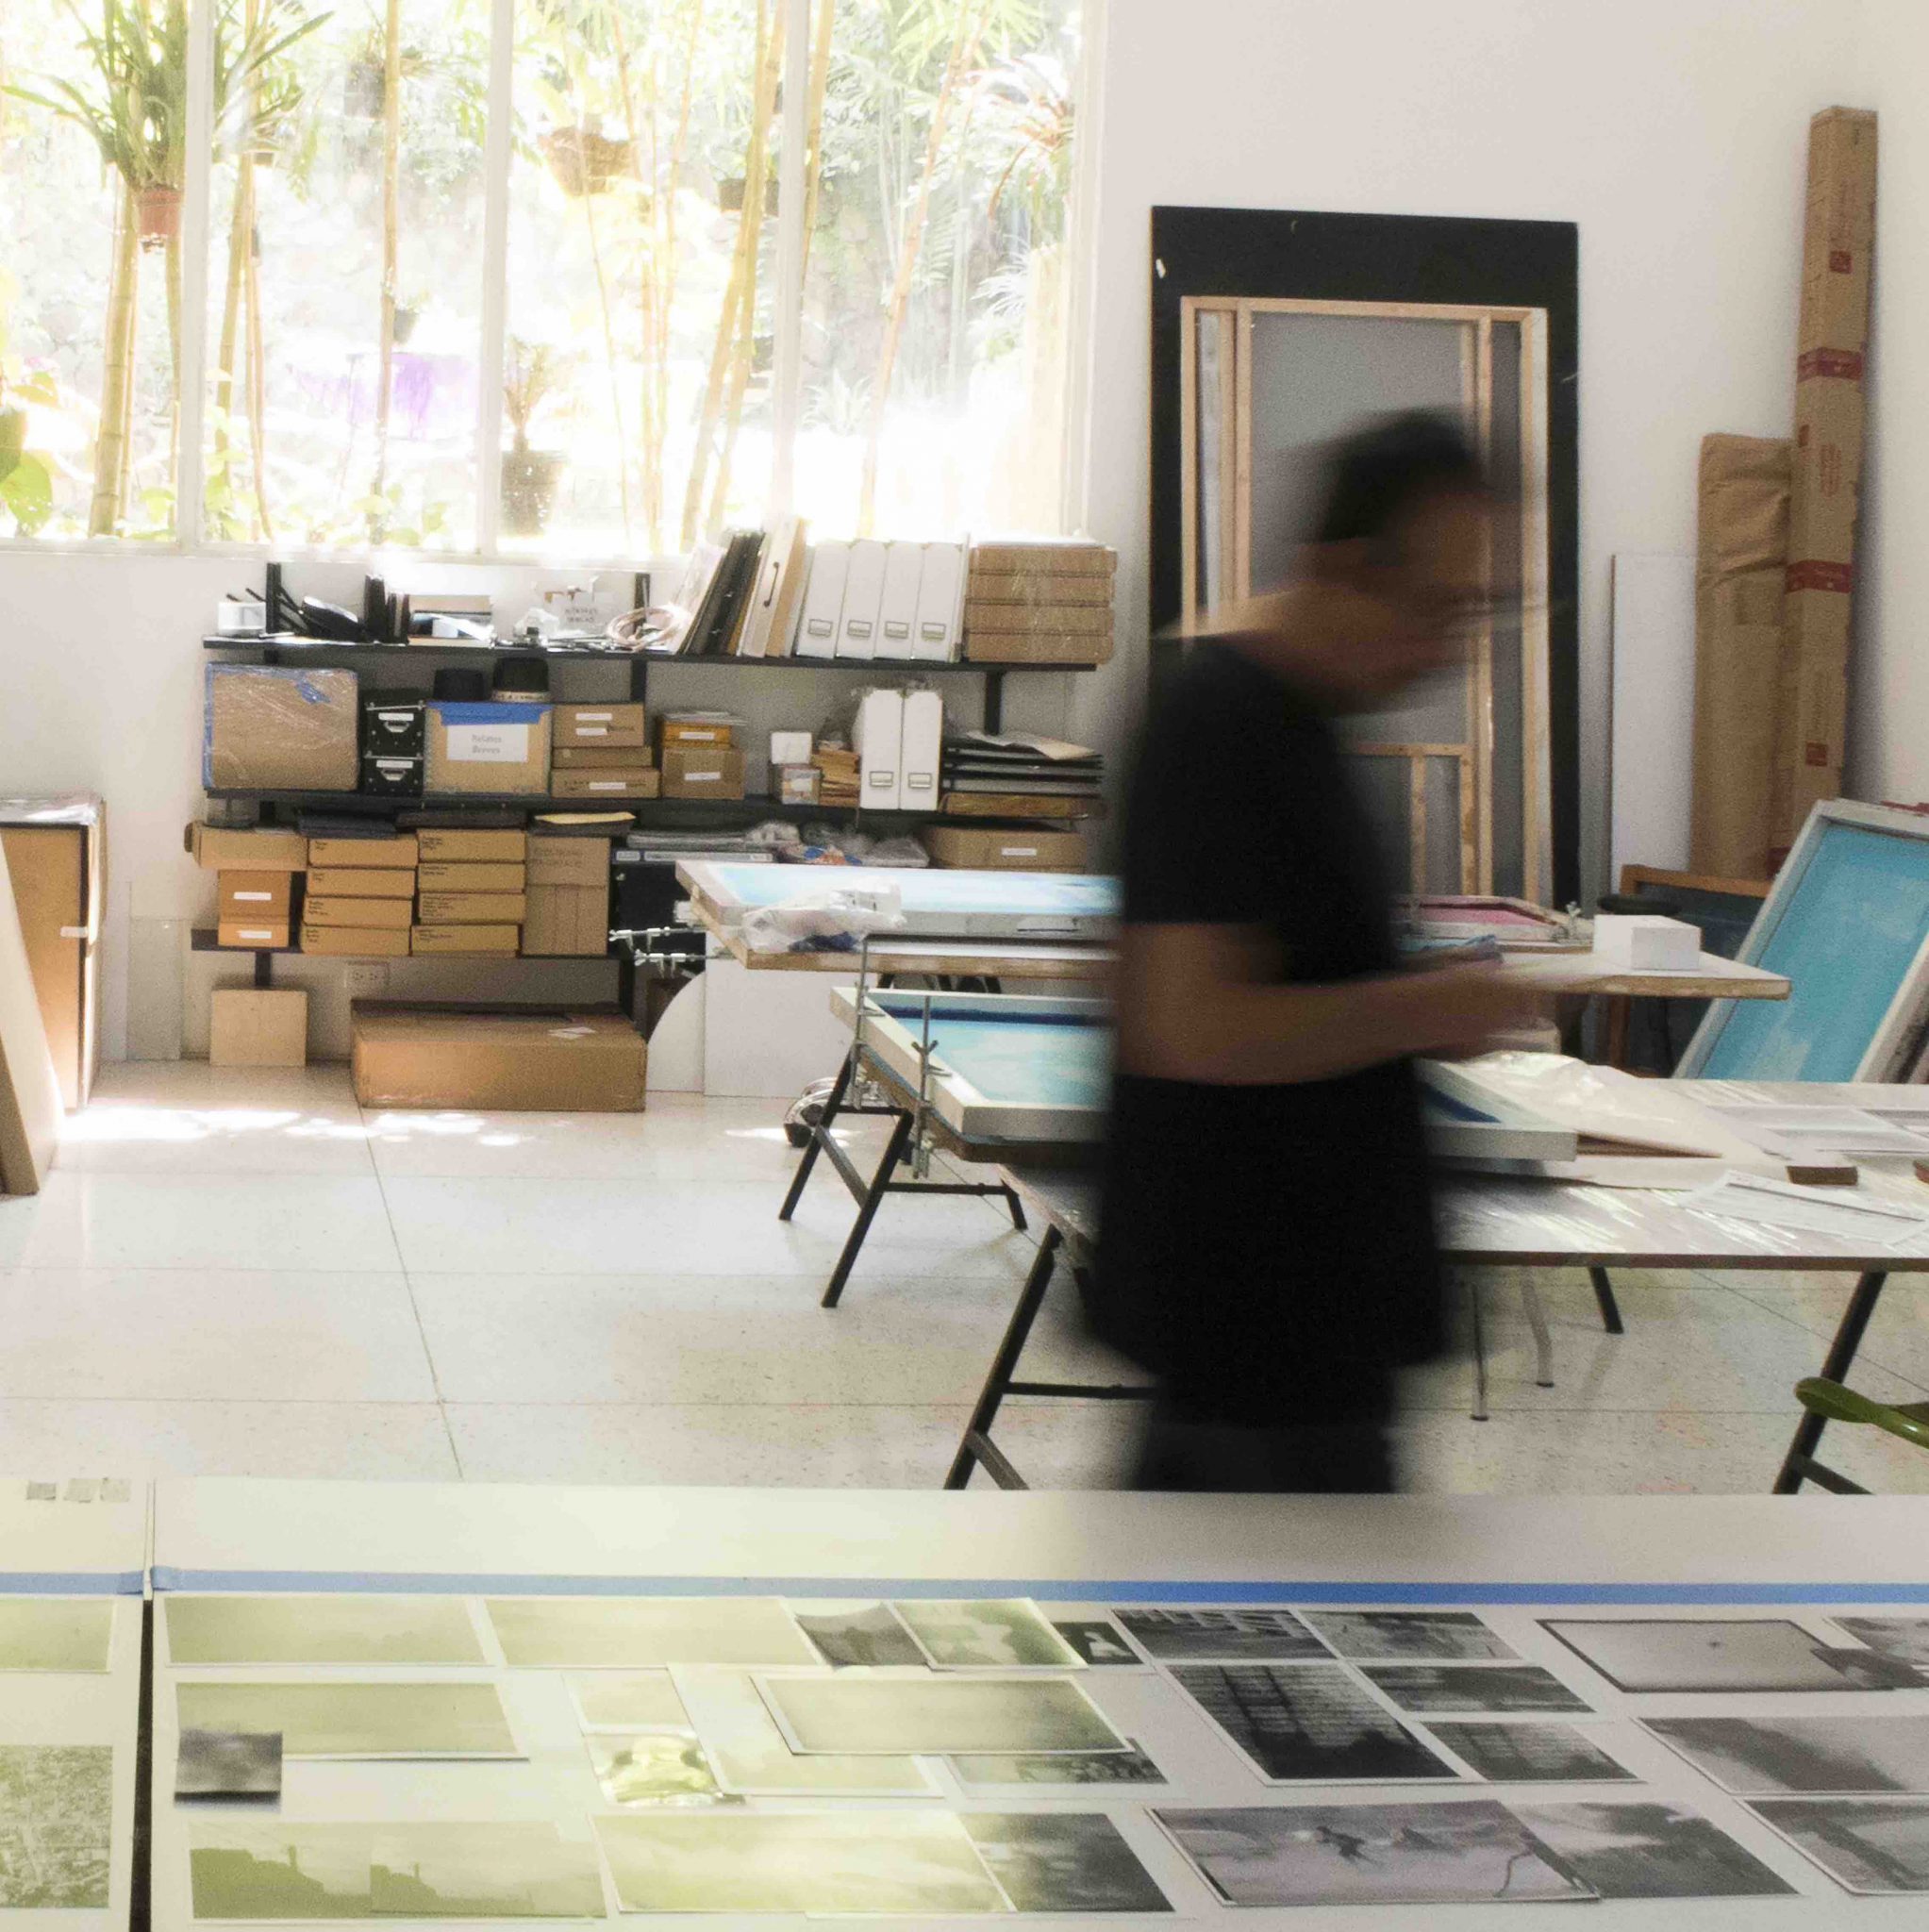 A blurred image of a man walking past a table of photos inside a studio.